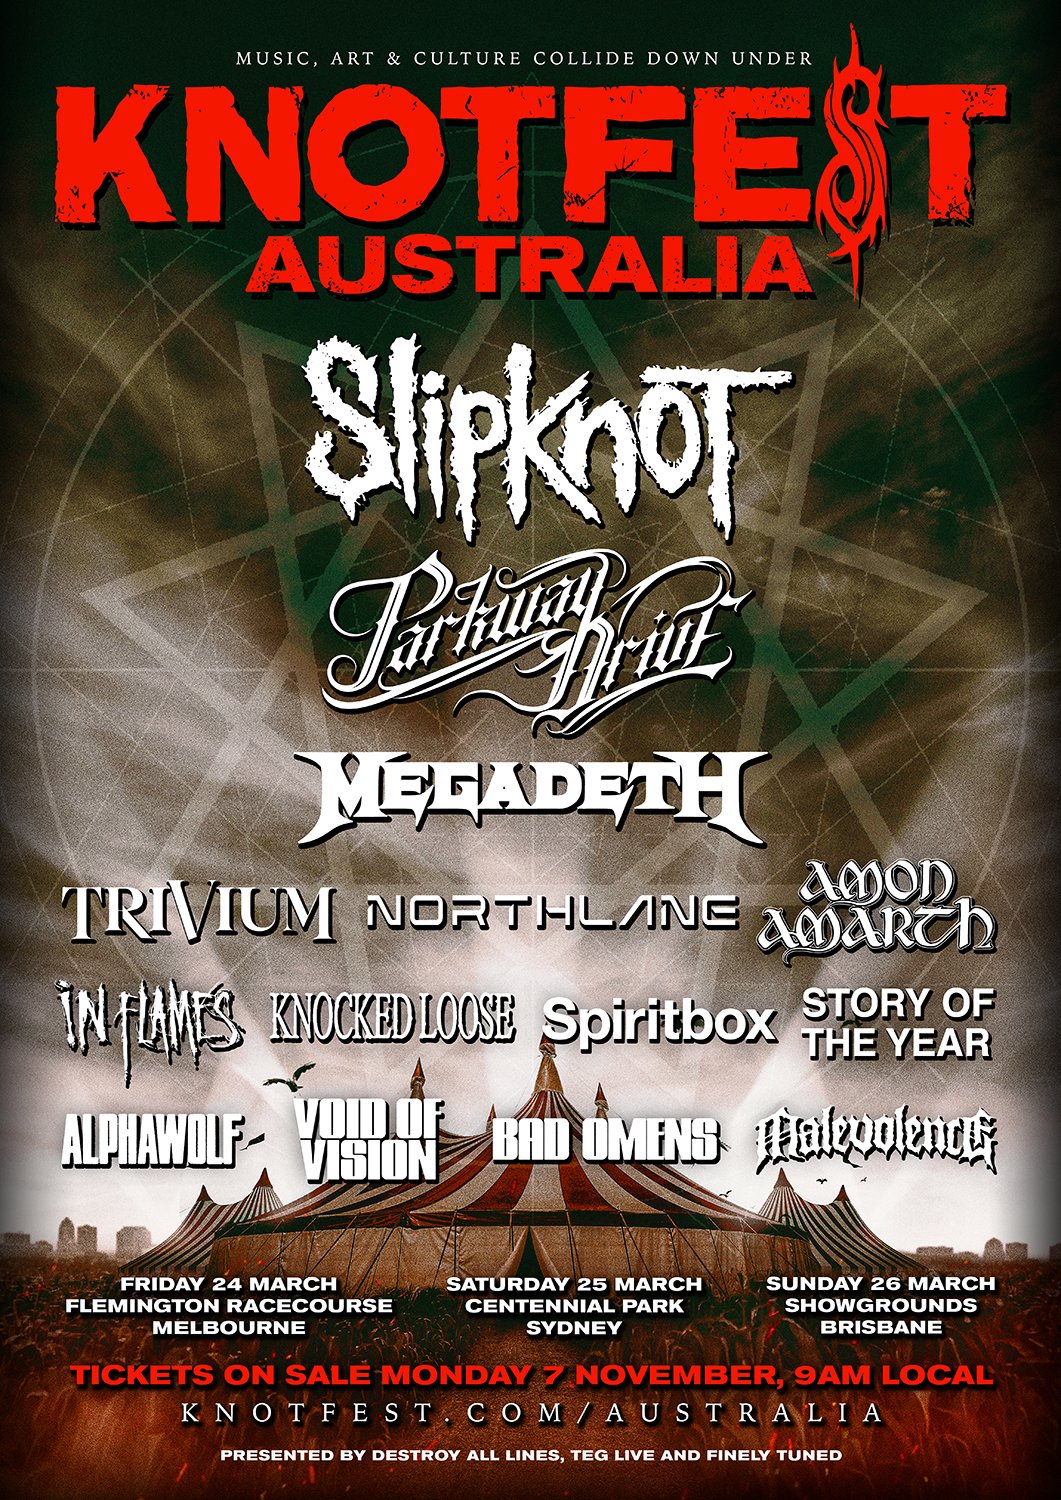 SLIPKNOT’S KNOTFEST IS COMING TO AUSTRALIA IN 2023